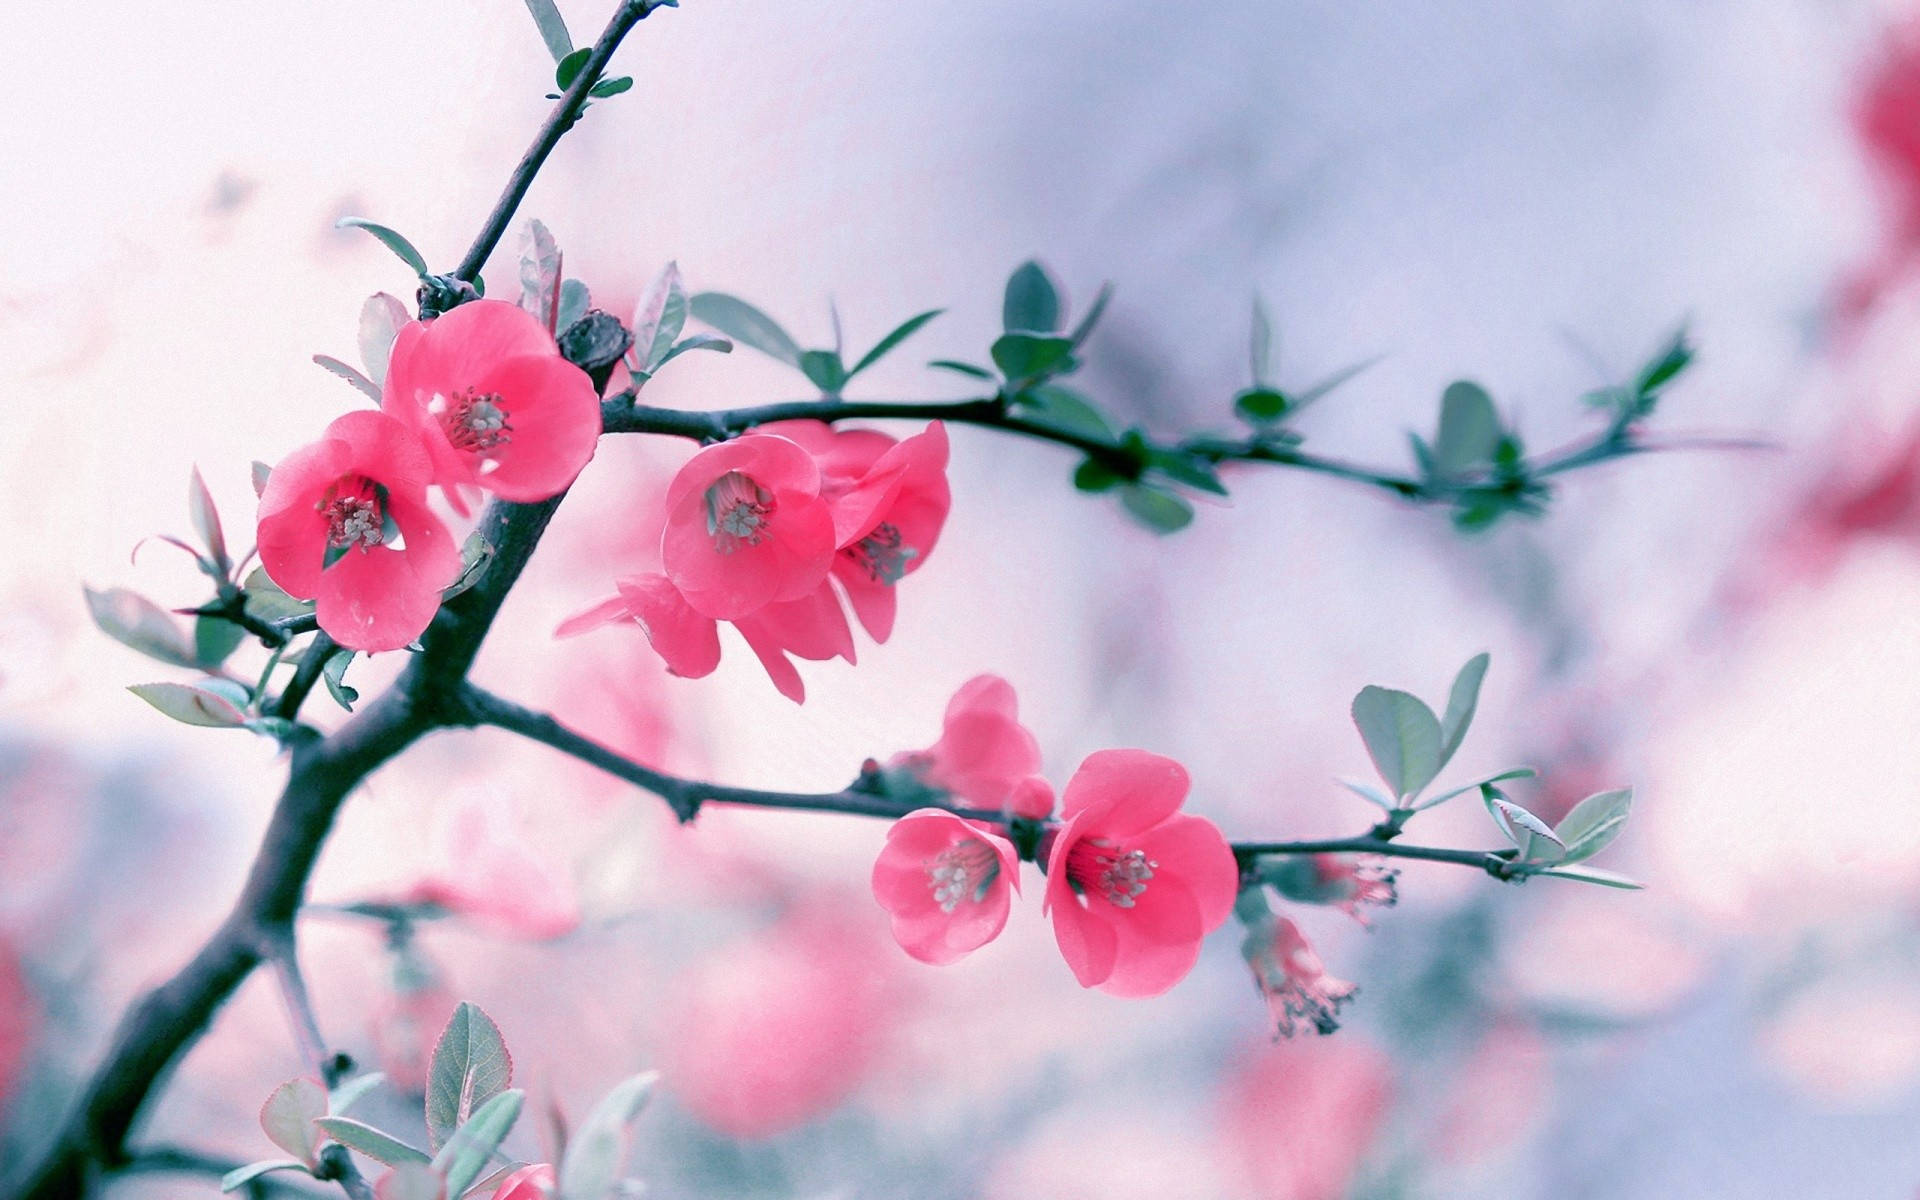 Flower Hd Pink Cherry Blossoms Background